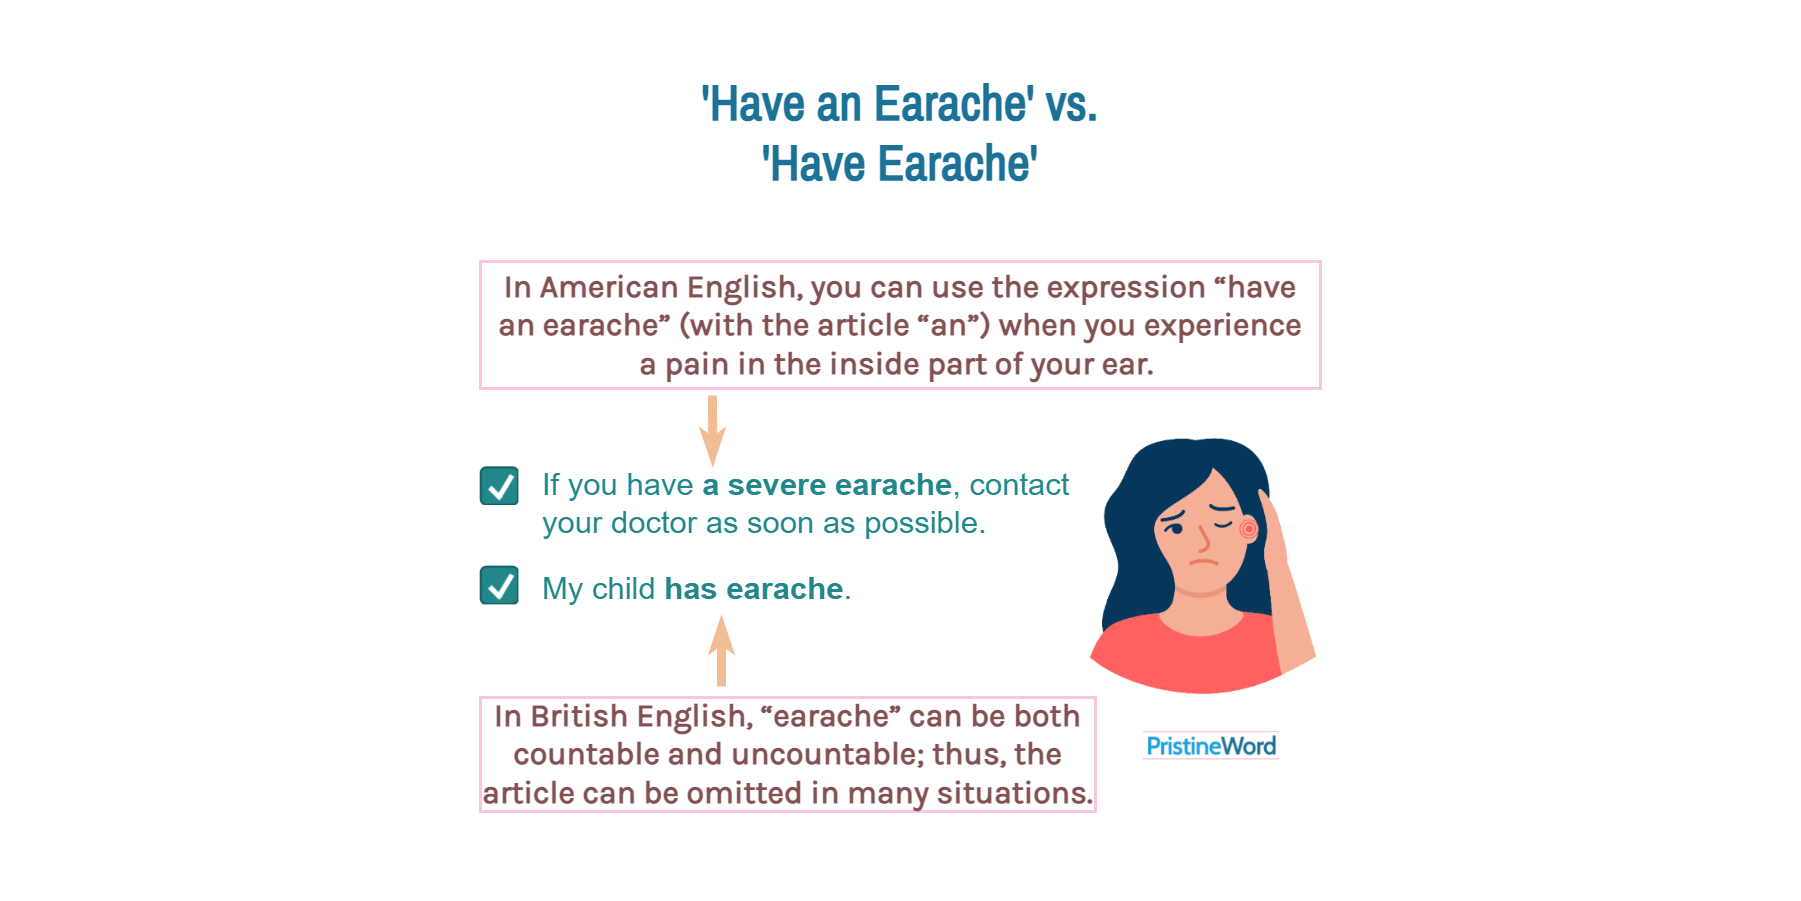 Have an Earache or Have Earache. Which is Correct?